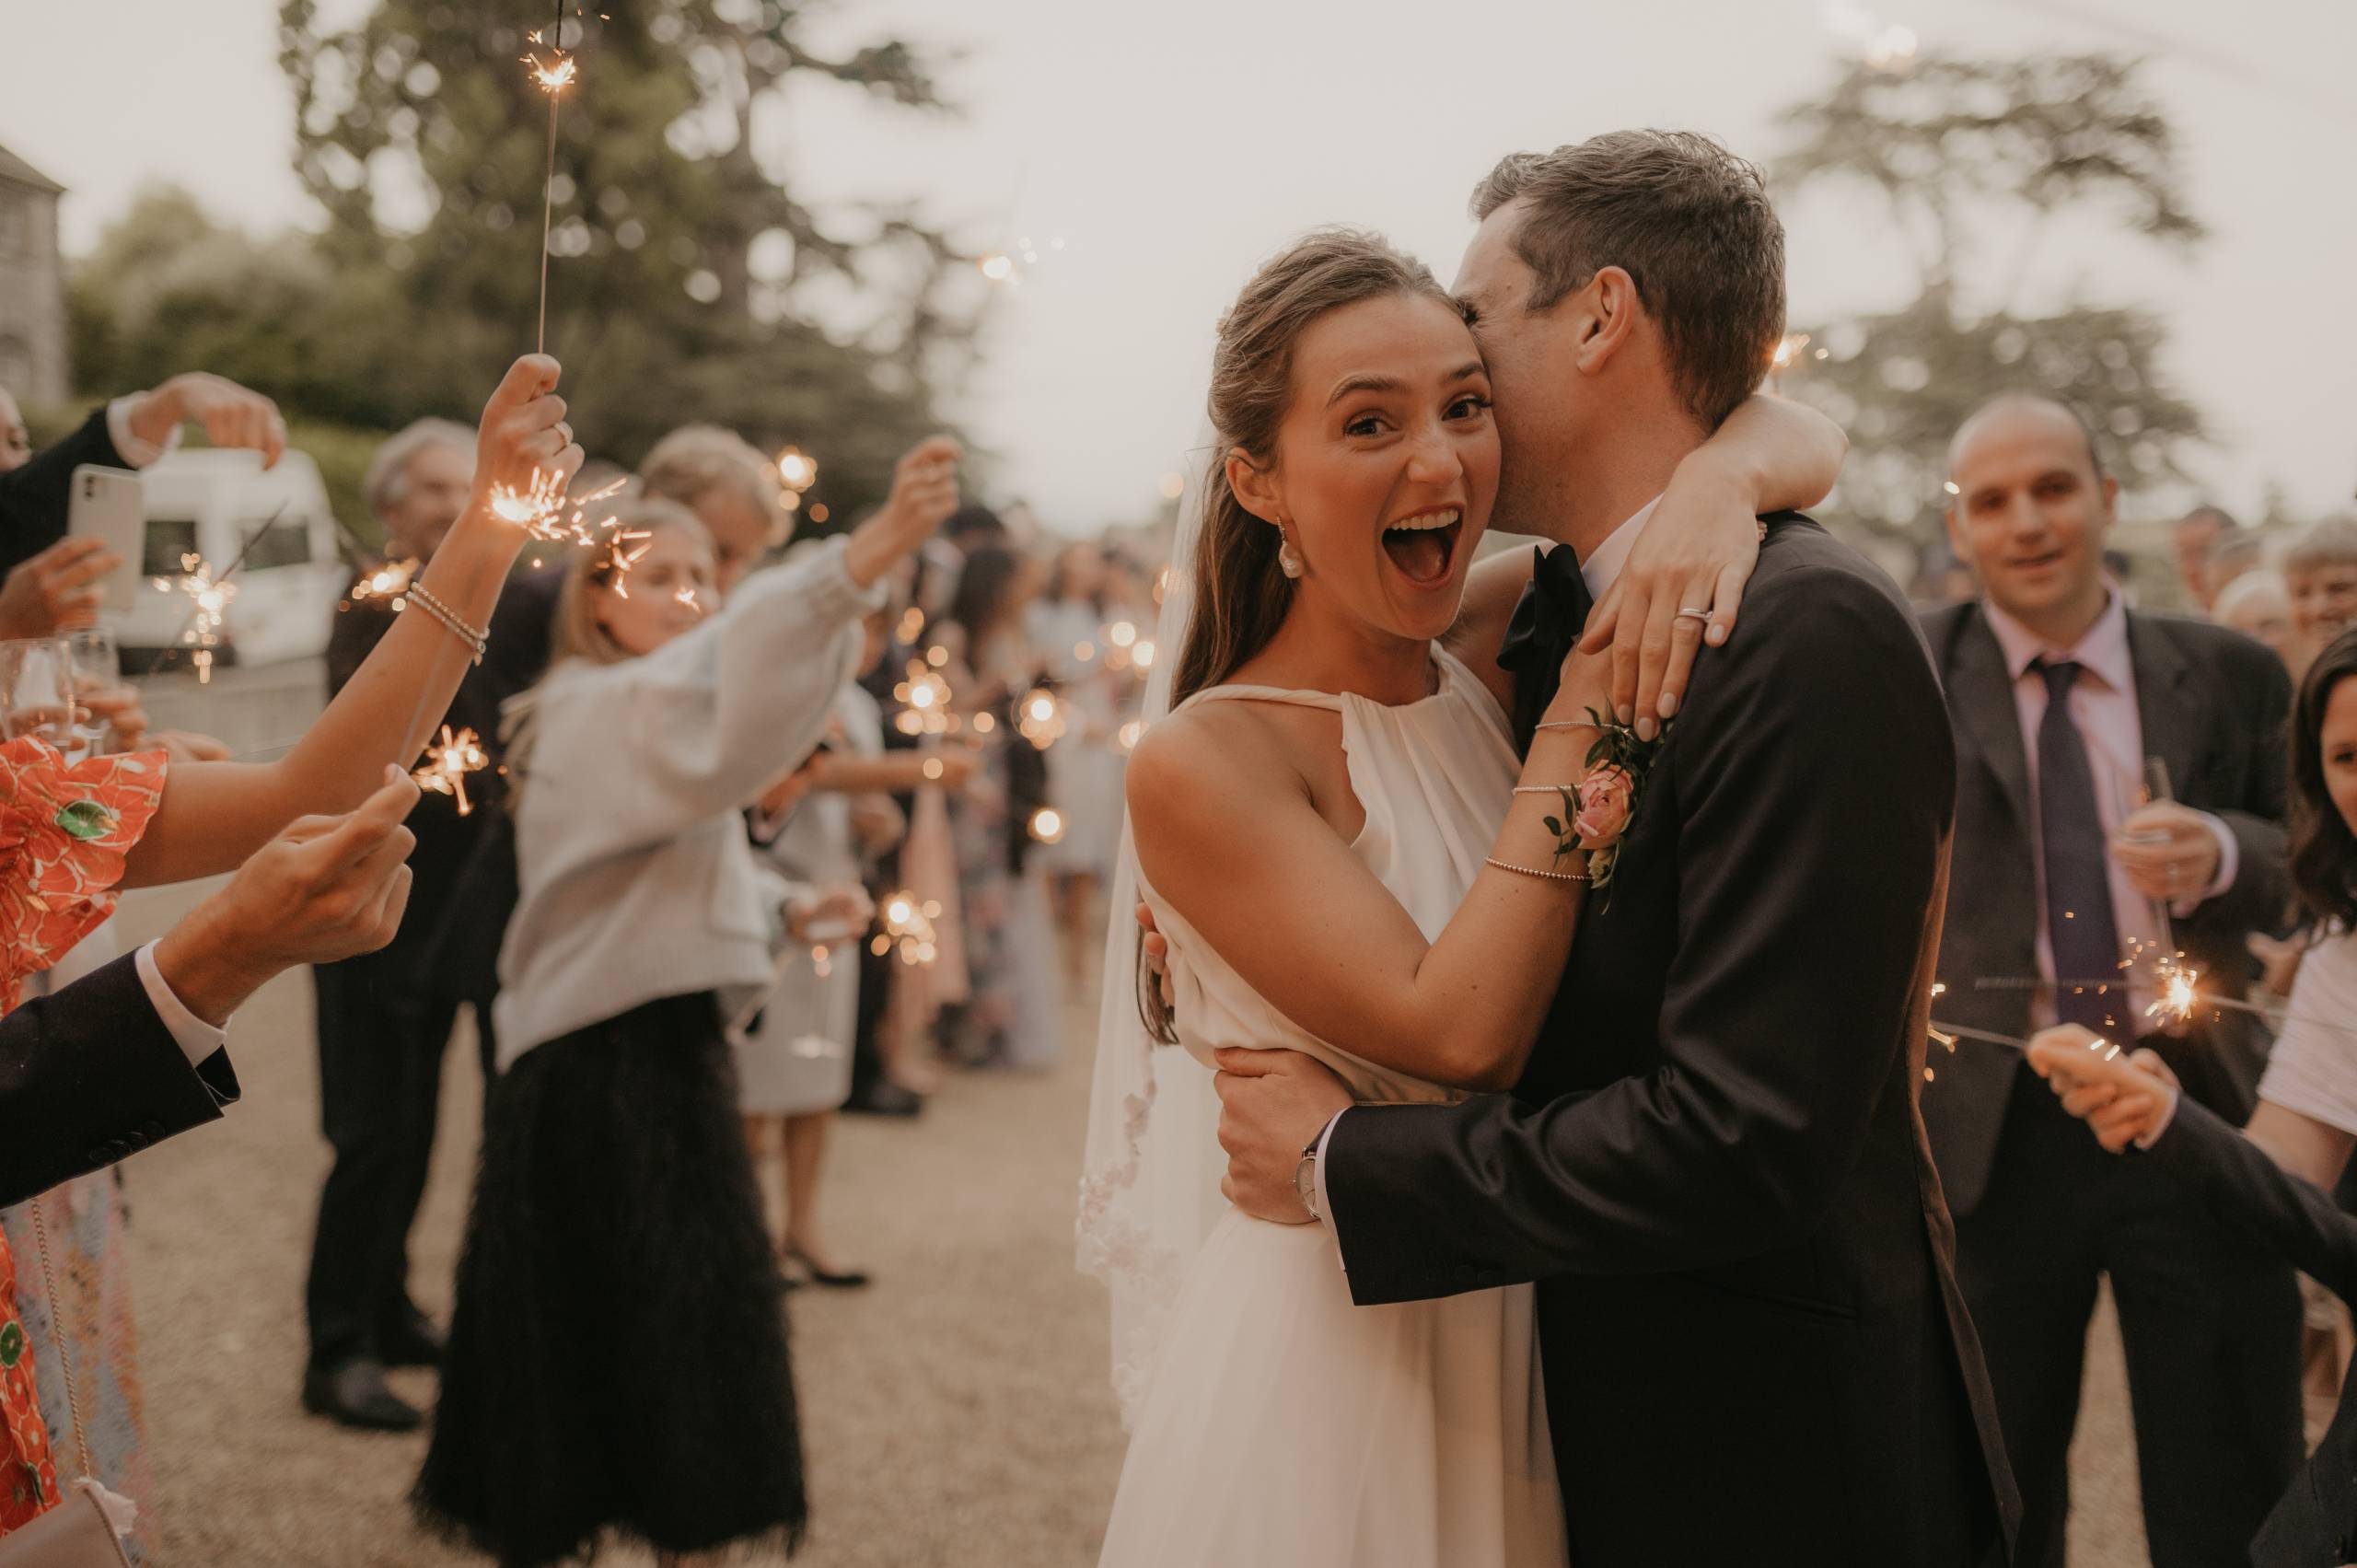 The image shows a joyful newlywed couple at their wedding reception. They are standing outdoors surrounded by trees and string lights, with a crowd of guests in the background. The bride is wearing a sleeveless white wedding gown with a simple belt detail. She has her hair styled up. The groom is wearing a classic black tuxedo with a bow tie. Both have huge smiles on their faces as they celebrate this special moment together amidst the festive reception setting. The lighting creates a warm, romantic ambiance capturing their happiness and excitement on their wedding day.